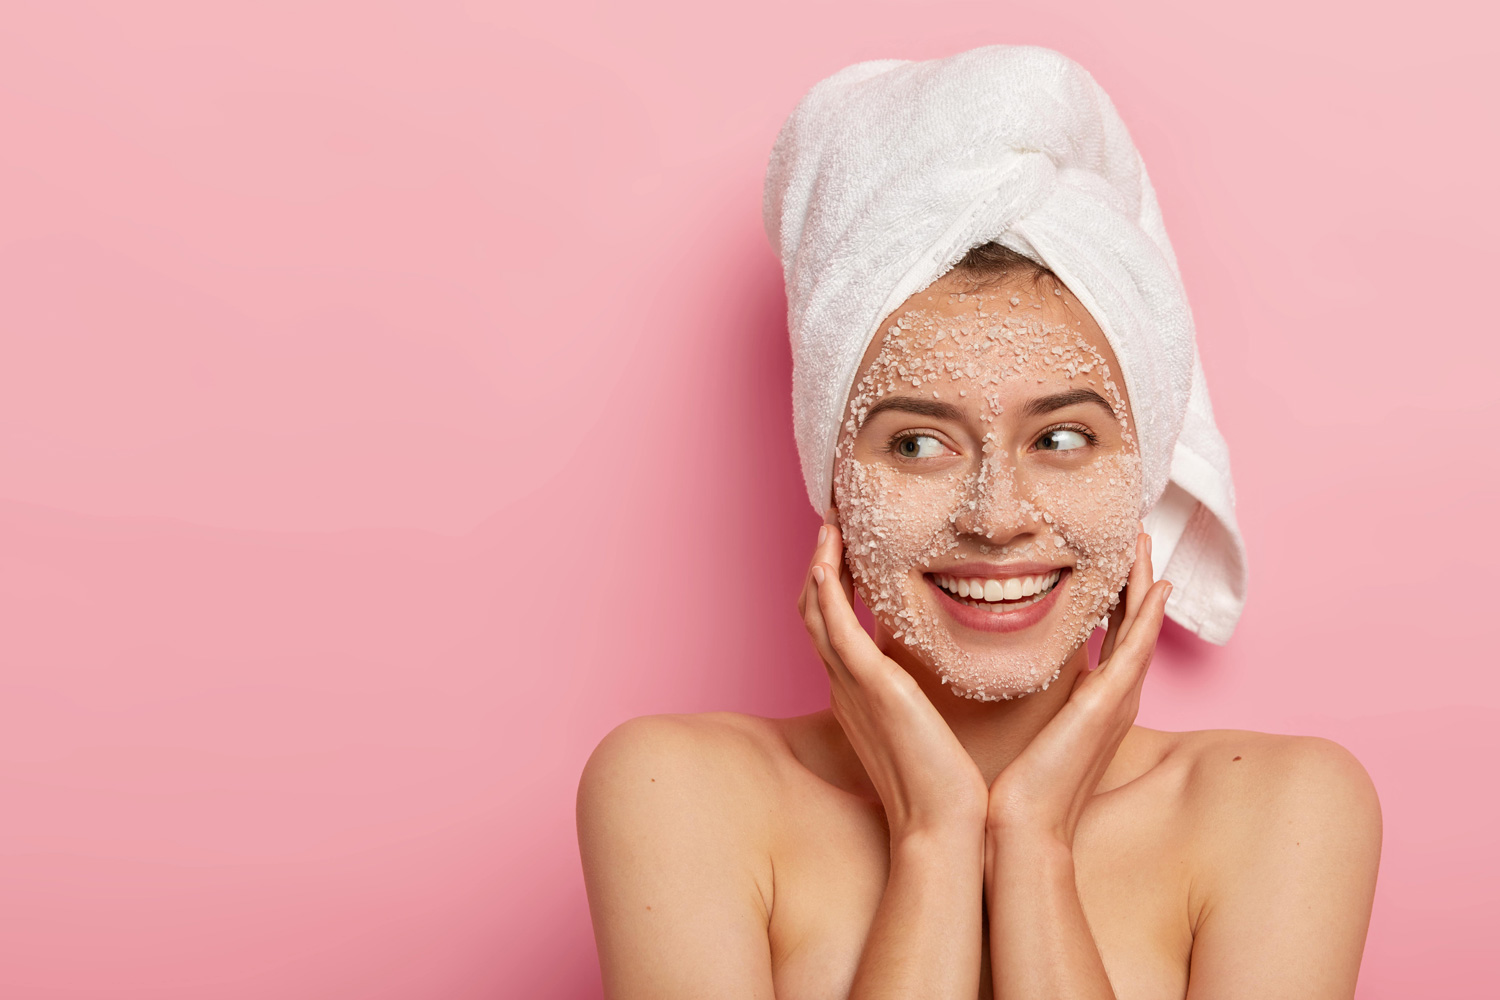 what is the best physical or chemical exfoliation?